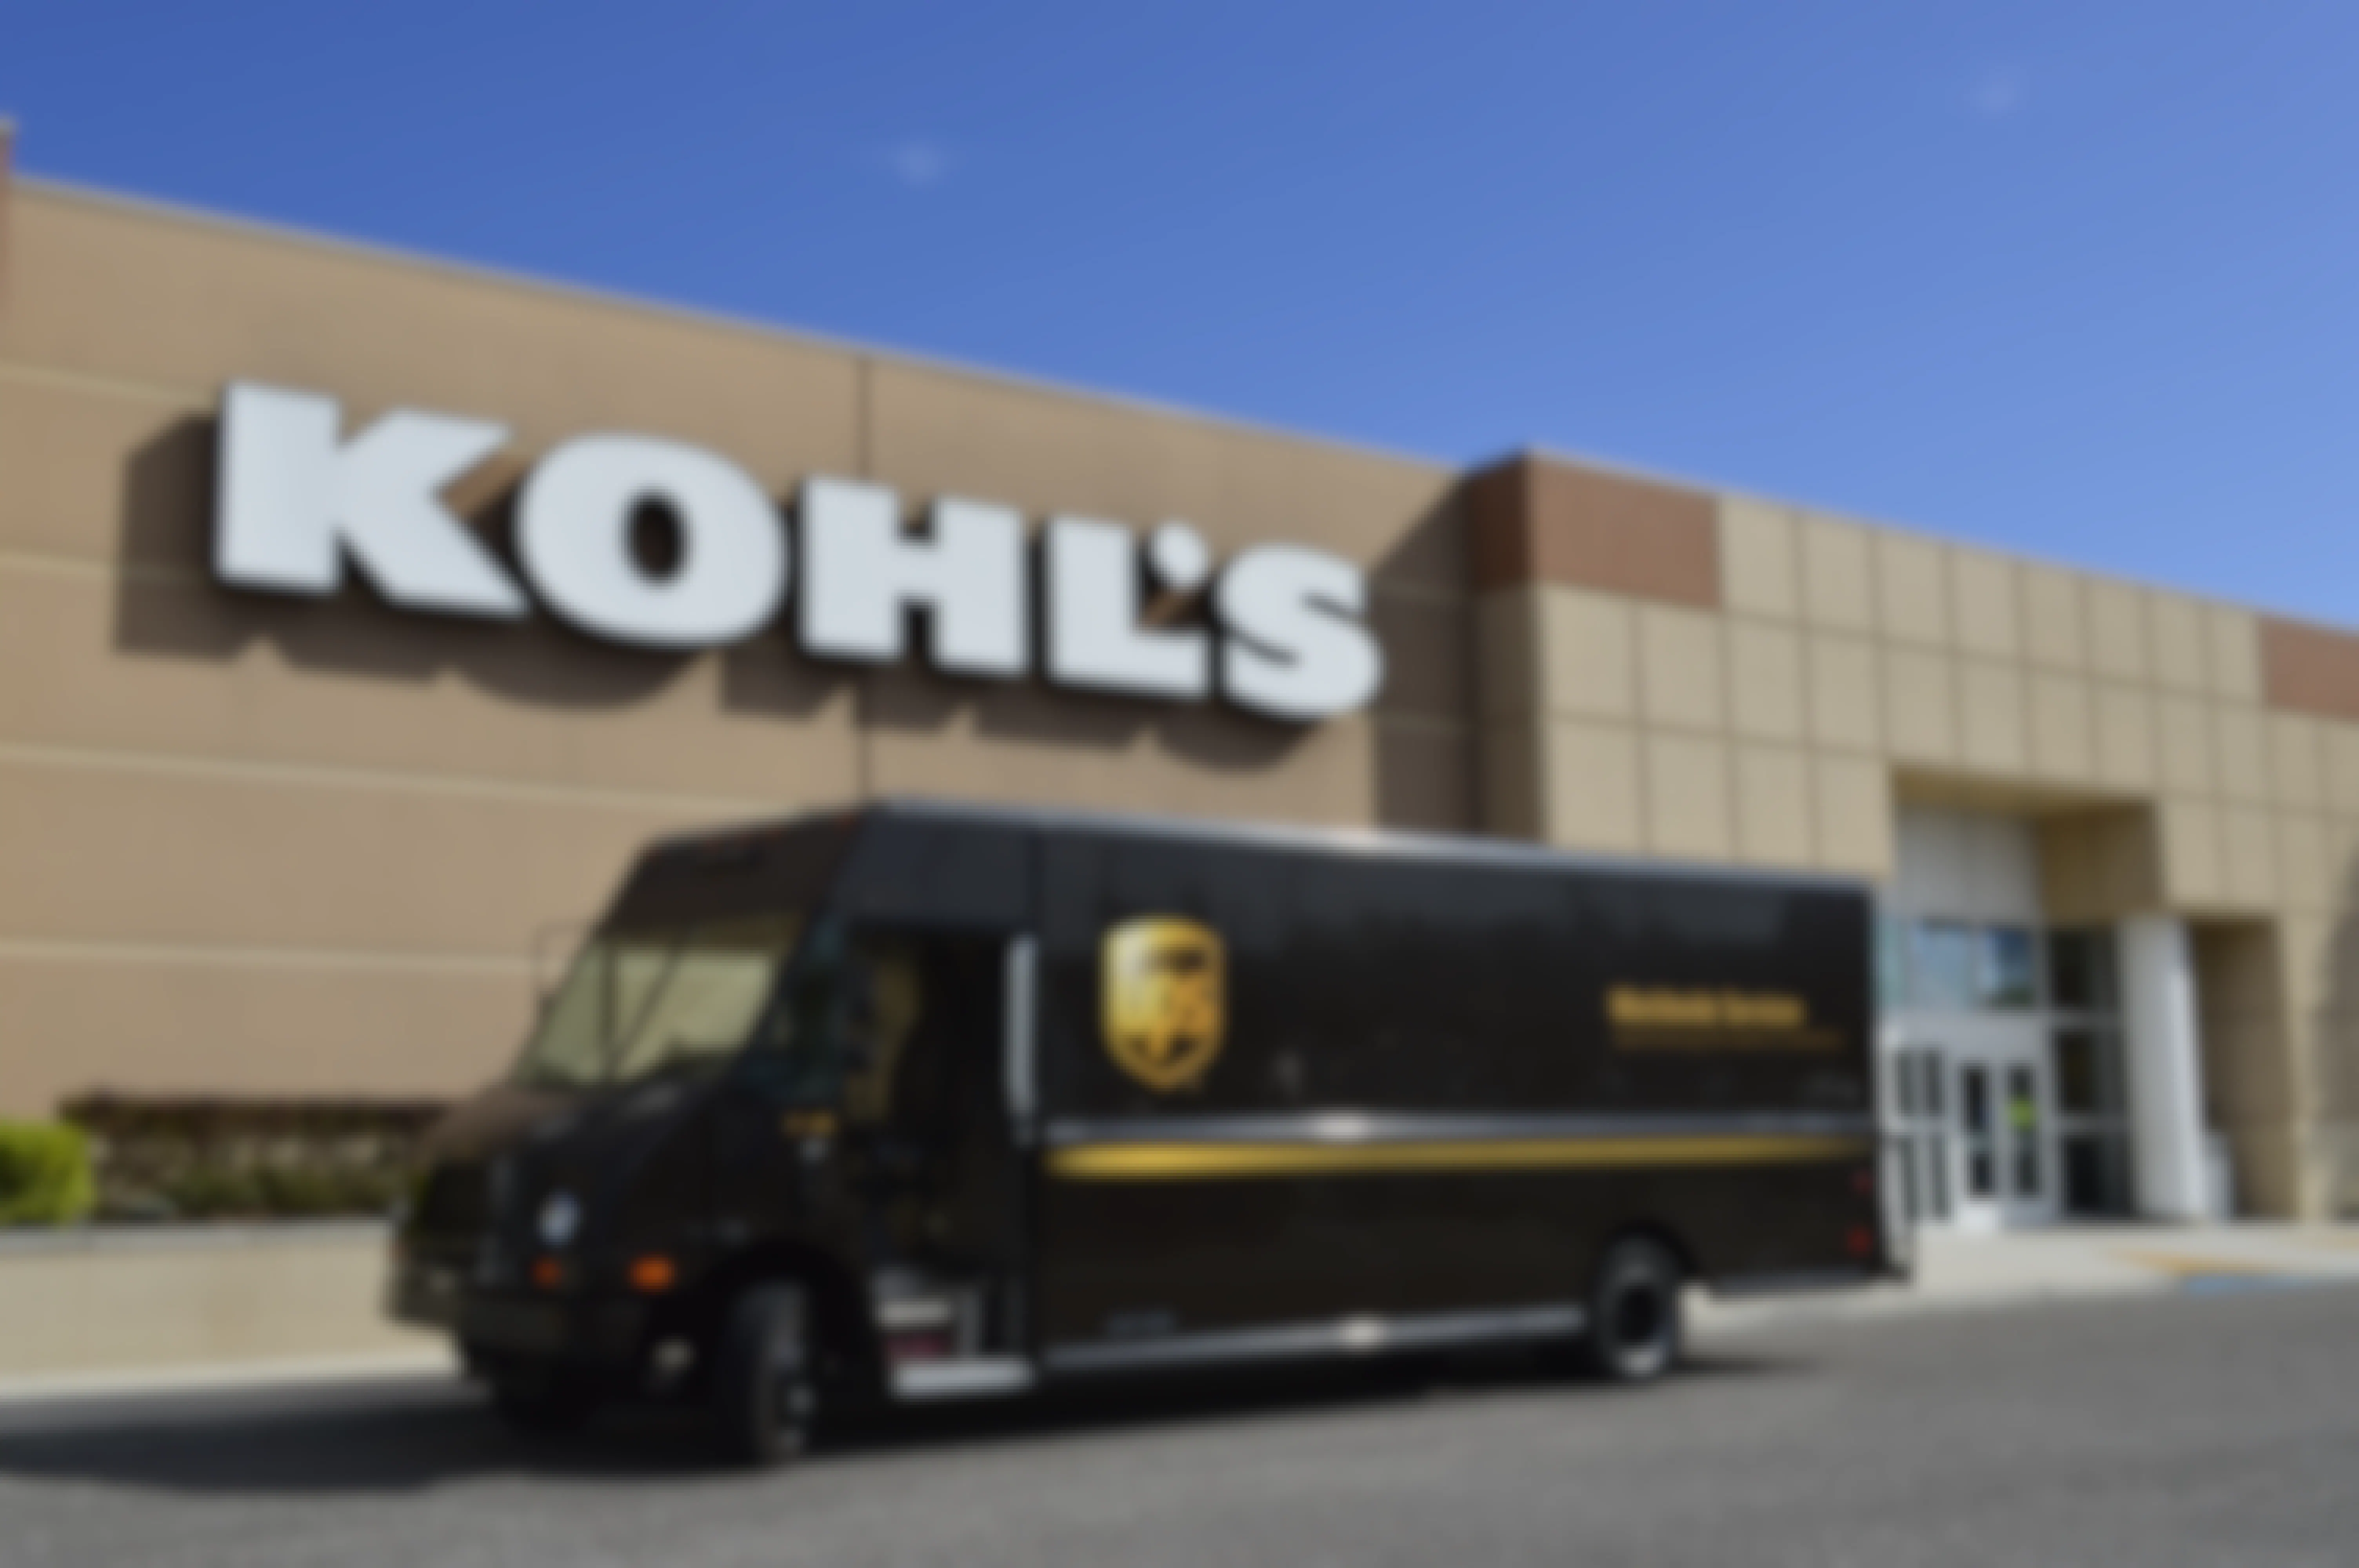 UPS truck in front of a Kohl's store